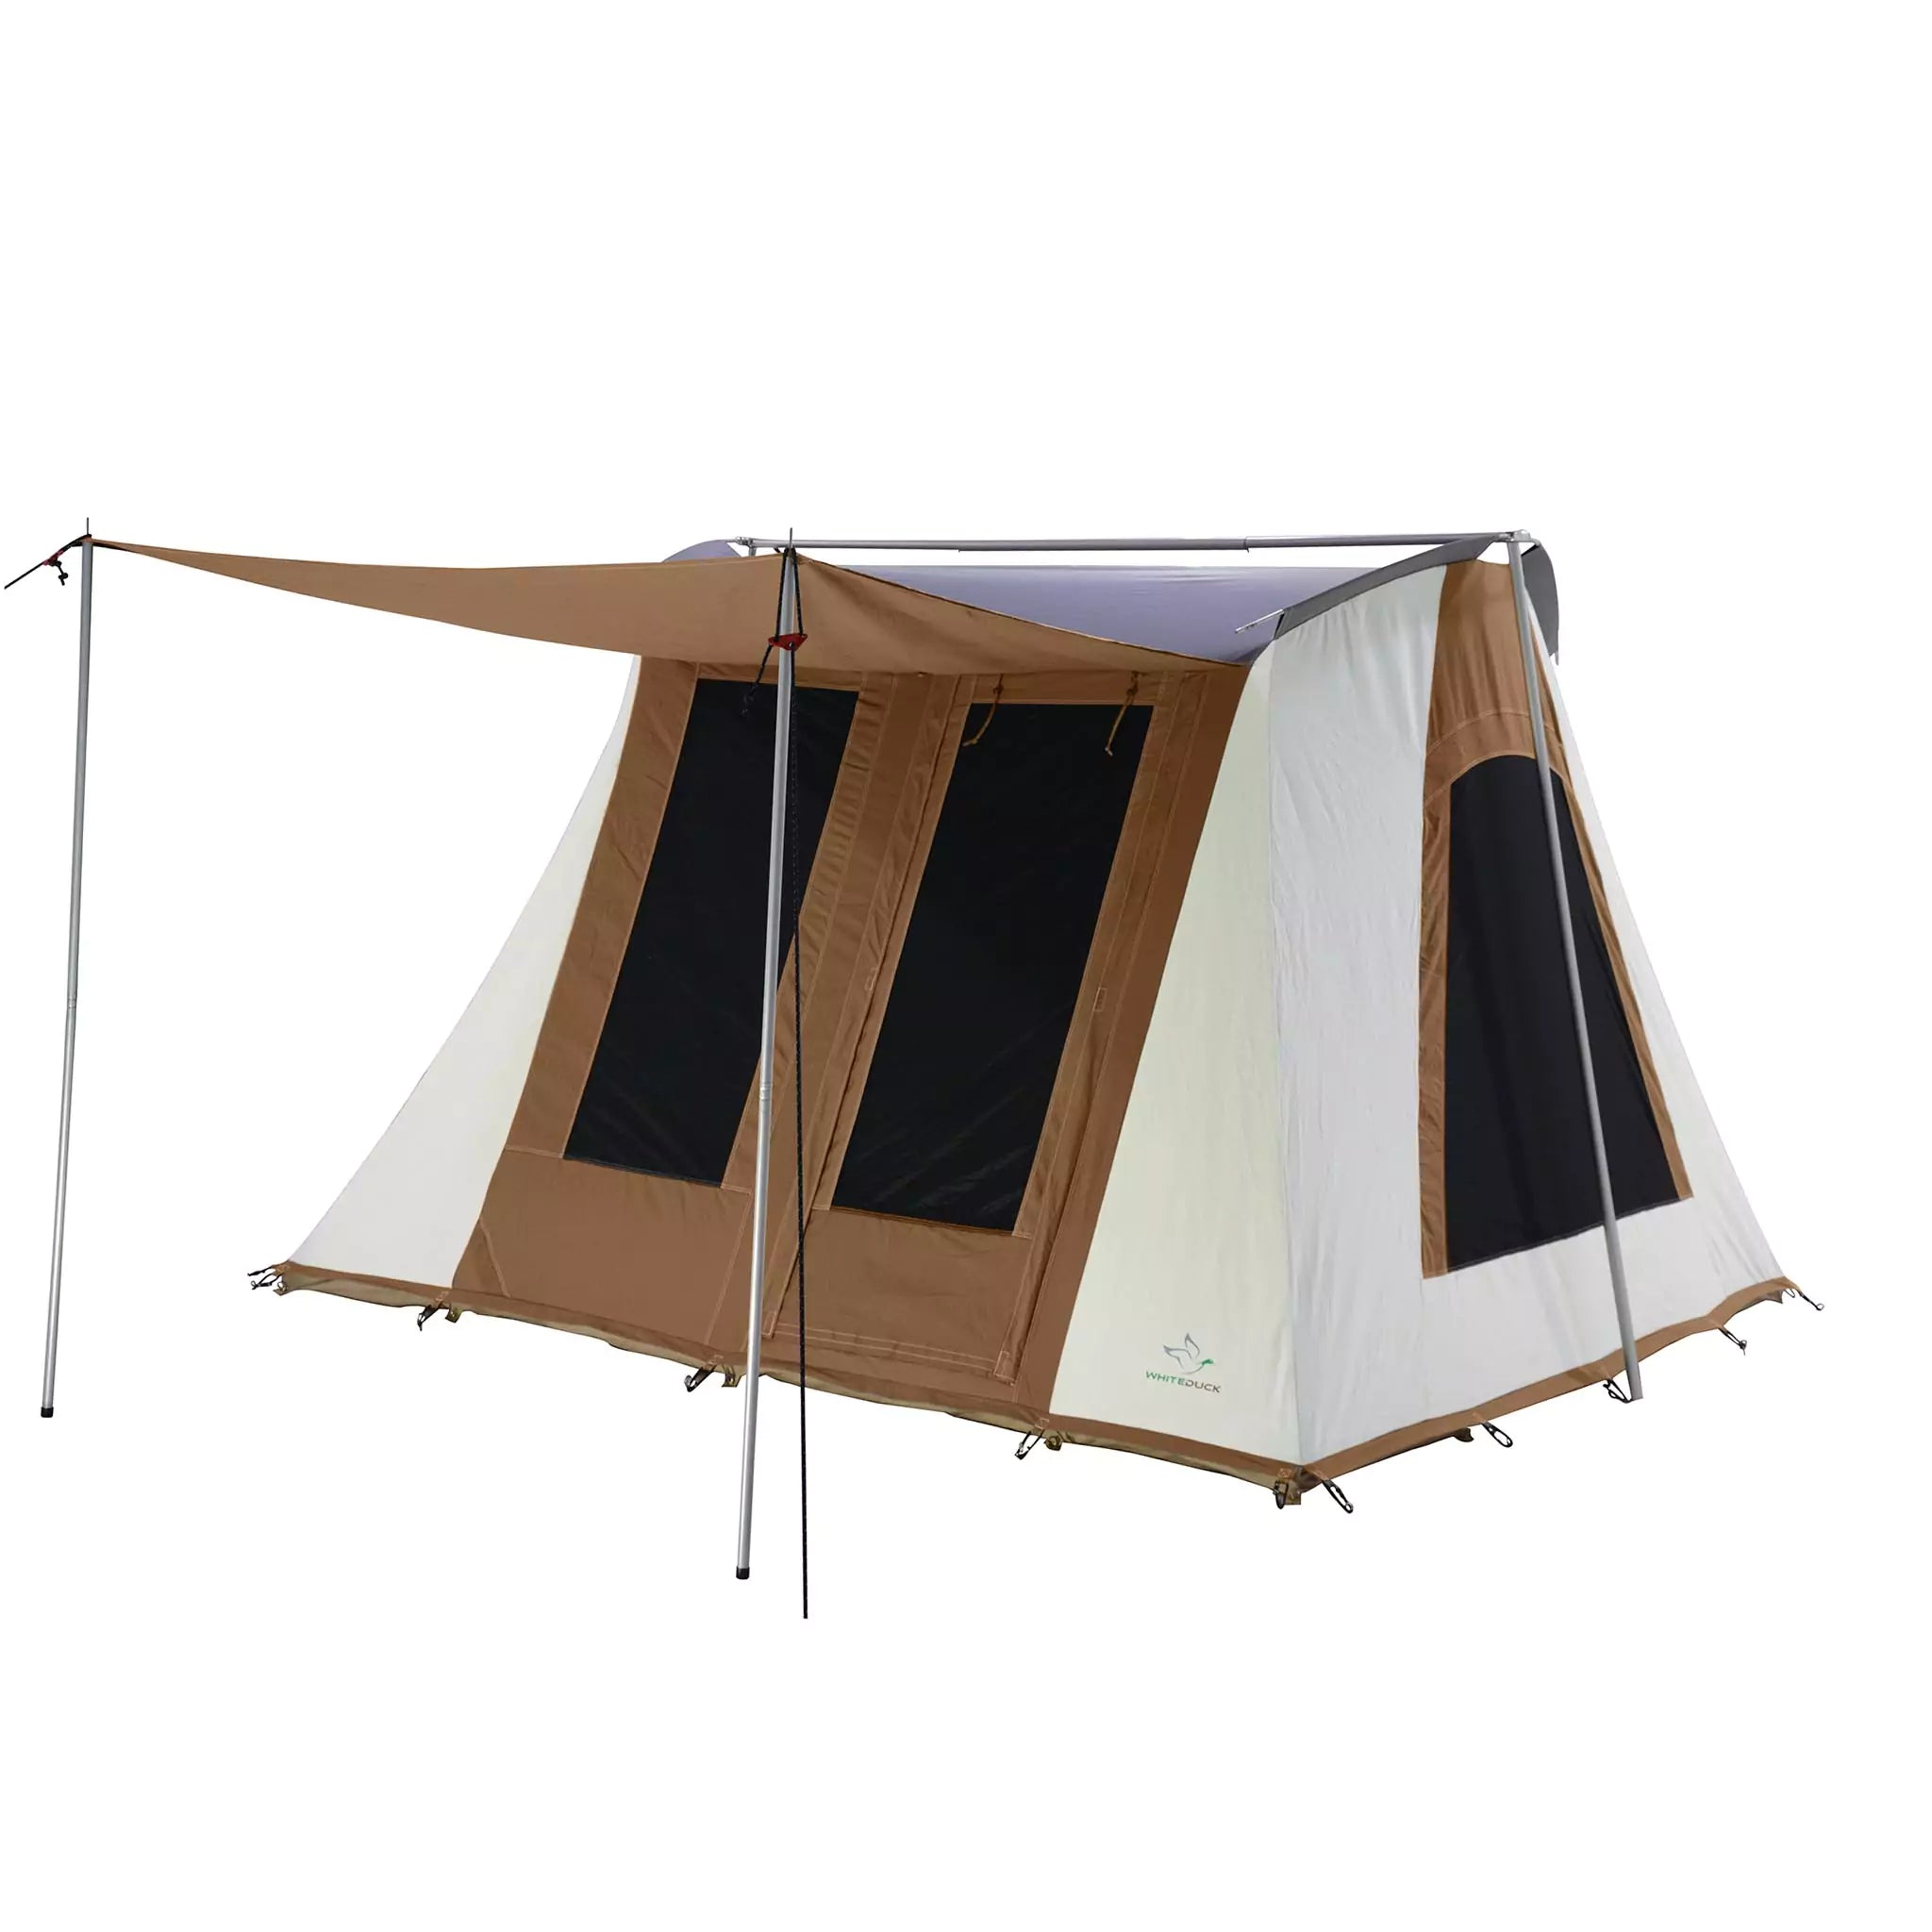 prota canvas deluxe 10x10 tent - side view